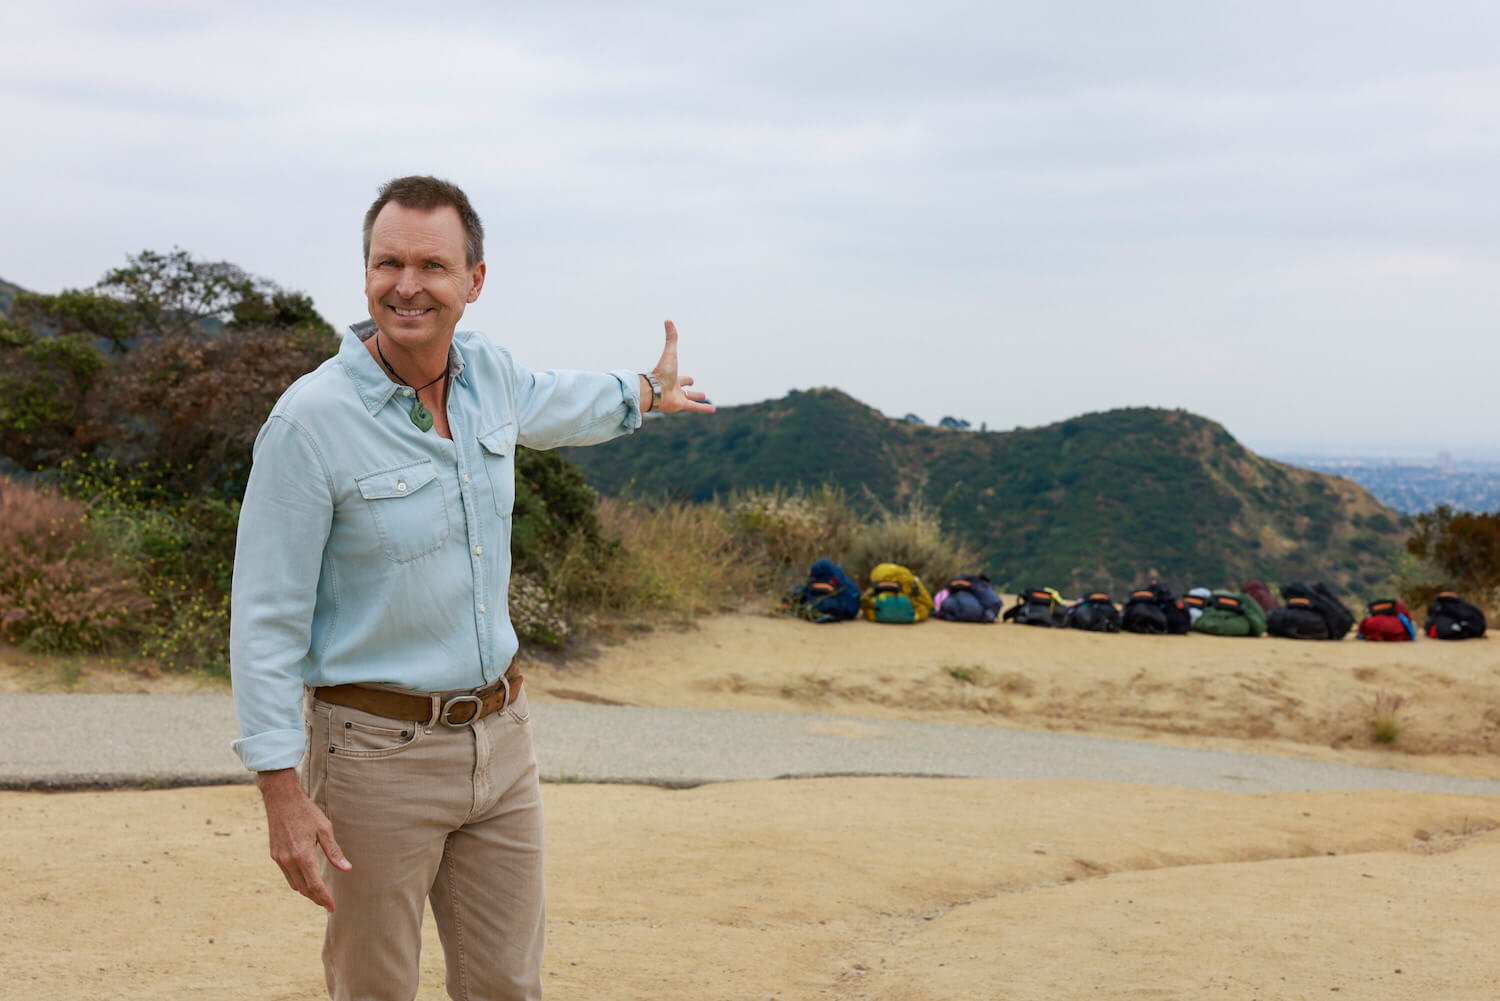 Phil Keoghan with his arm outstretched and smiling in 'The Amazing Race' Season 35